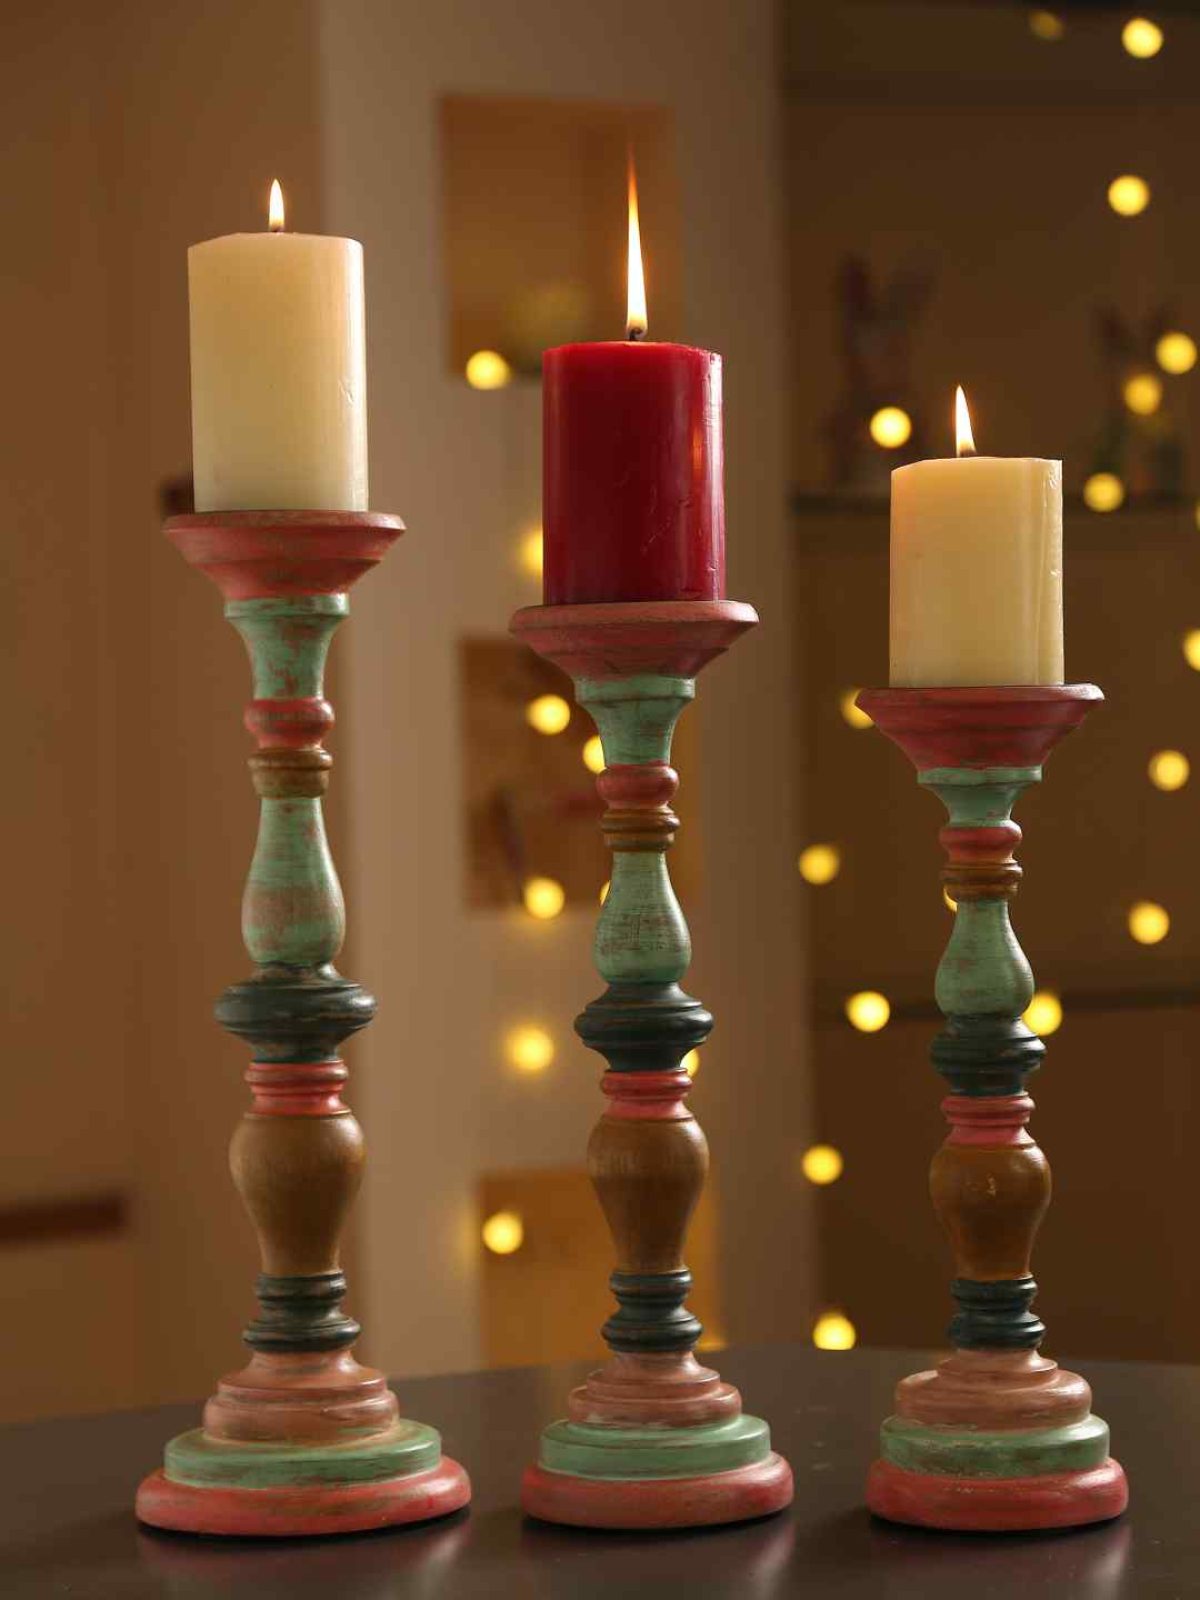 Shop Wooden Carved Pillar Candle Holders Set Of 3 - Amoliconcepts